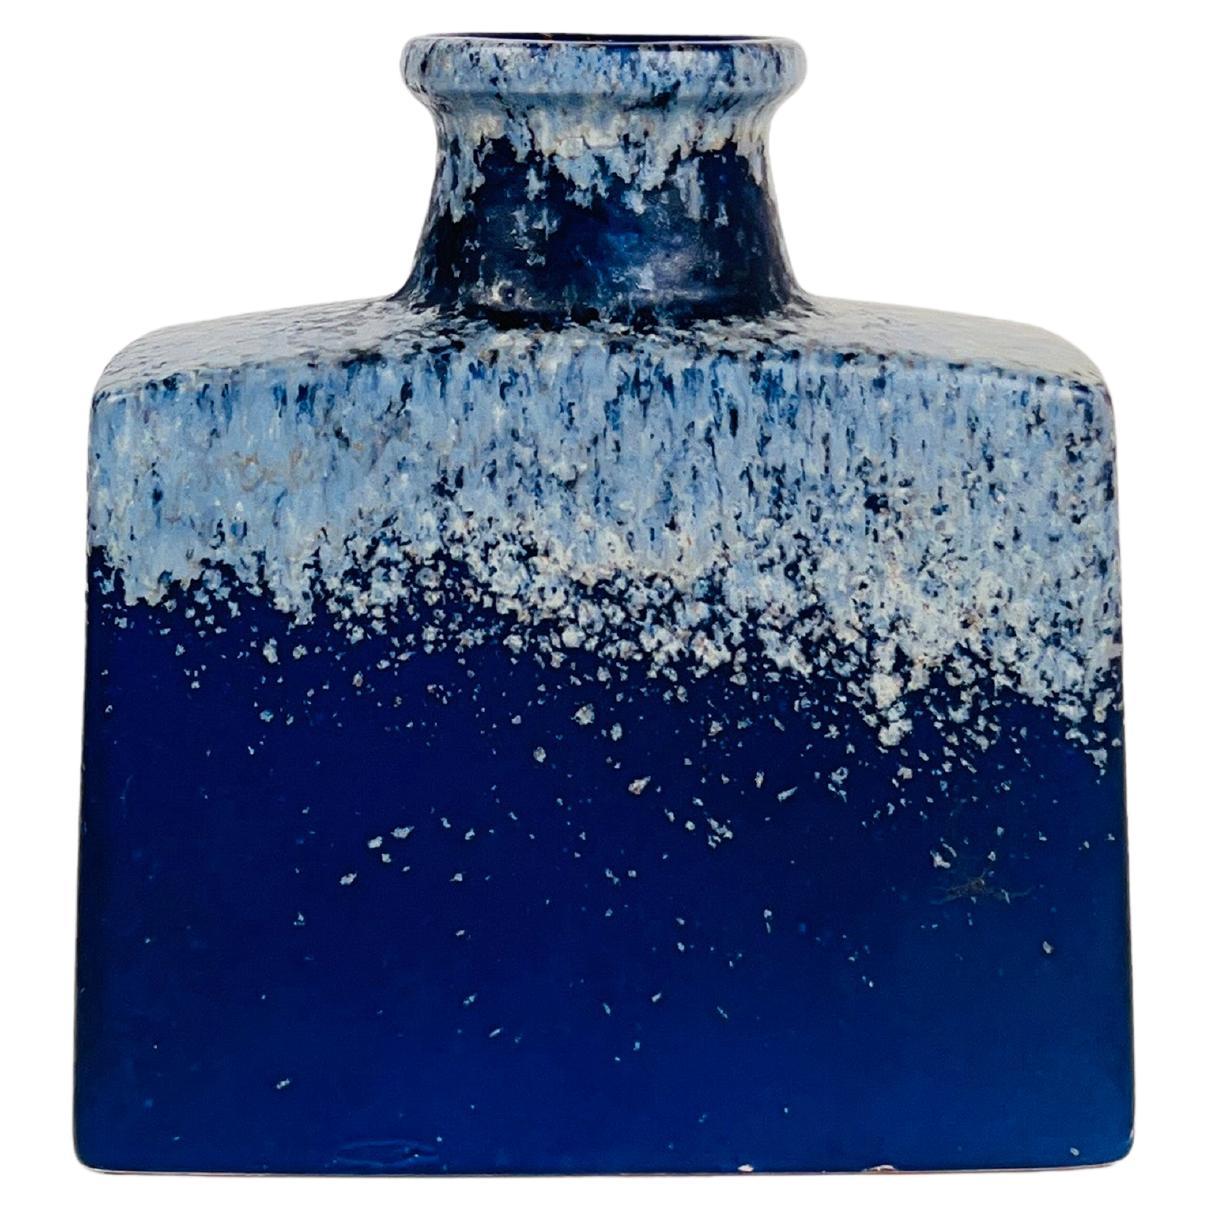 Fat Lava Short Vase in Smooth Klein Blue and White Texture Glaze, Germany 1960